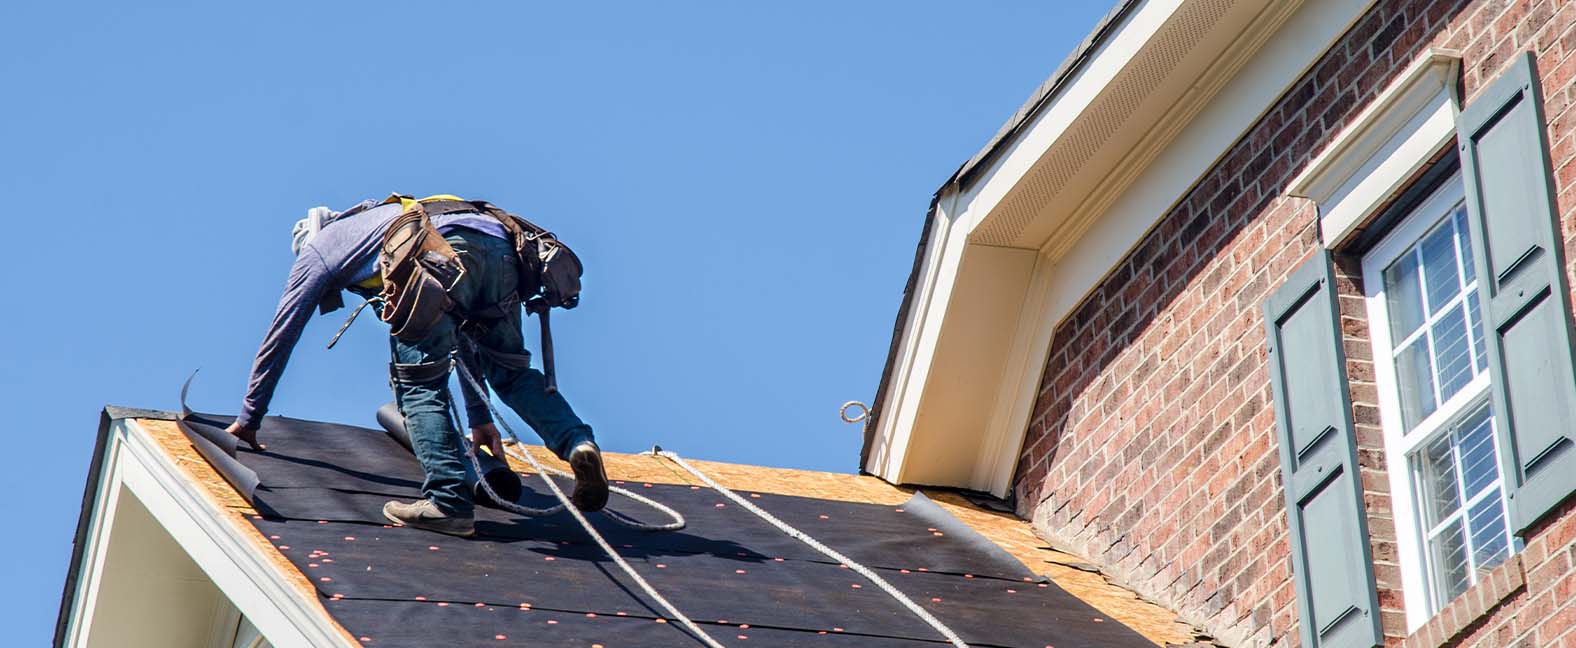 A roofer replacing shingles on a brick home.